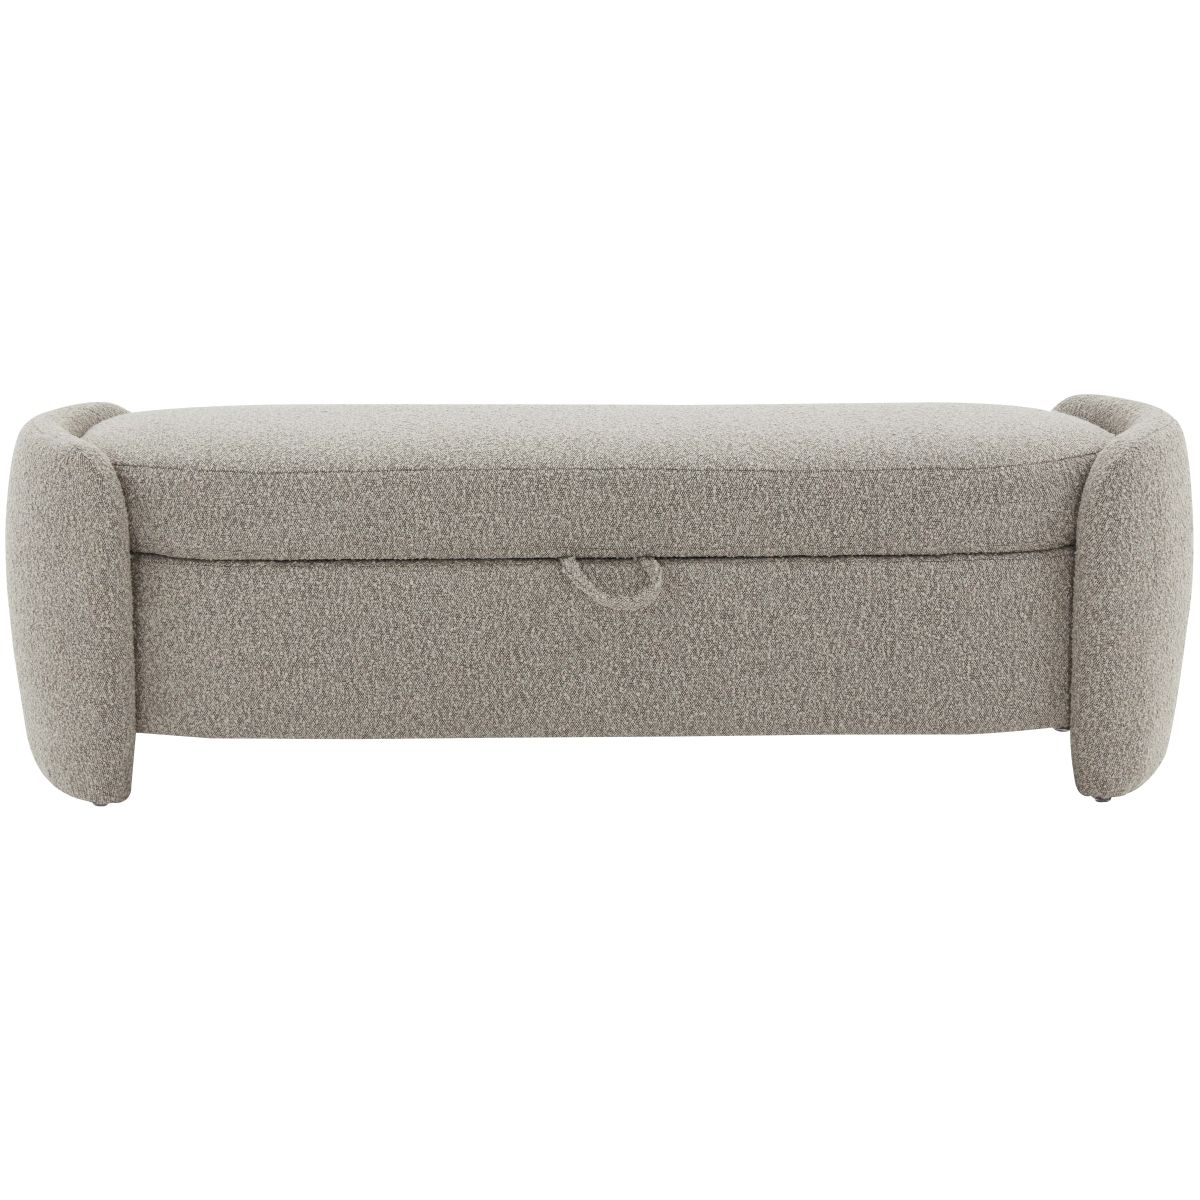 Safavieh Couture Danianna Boucle Bench - Light Brown